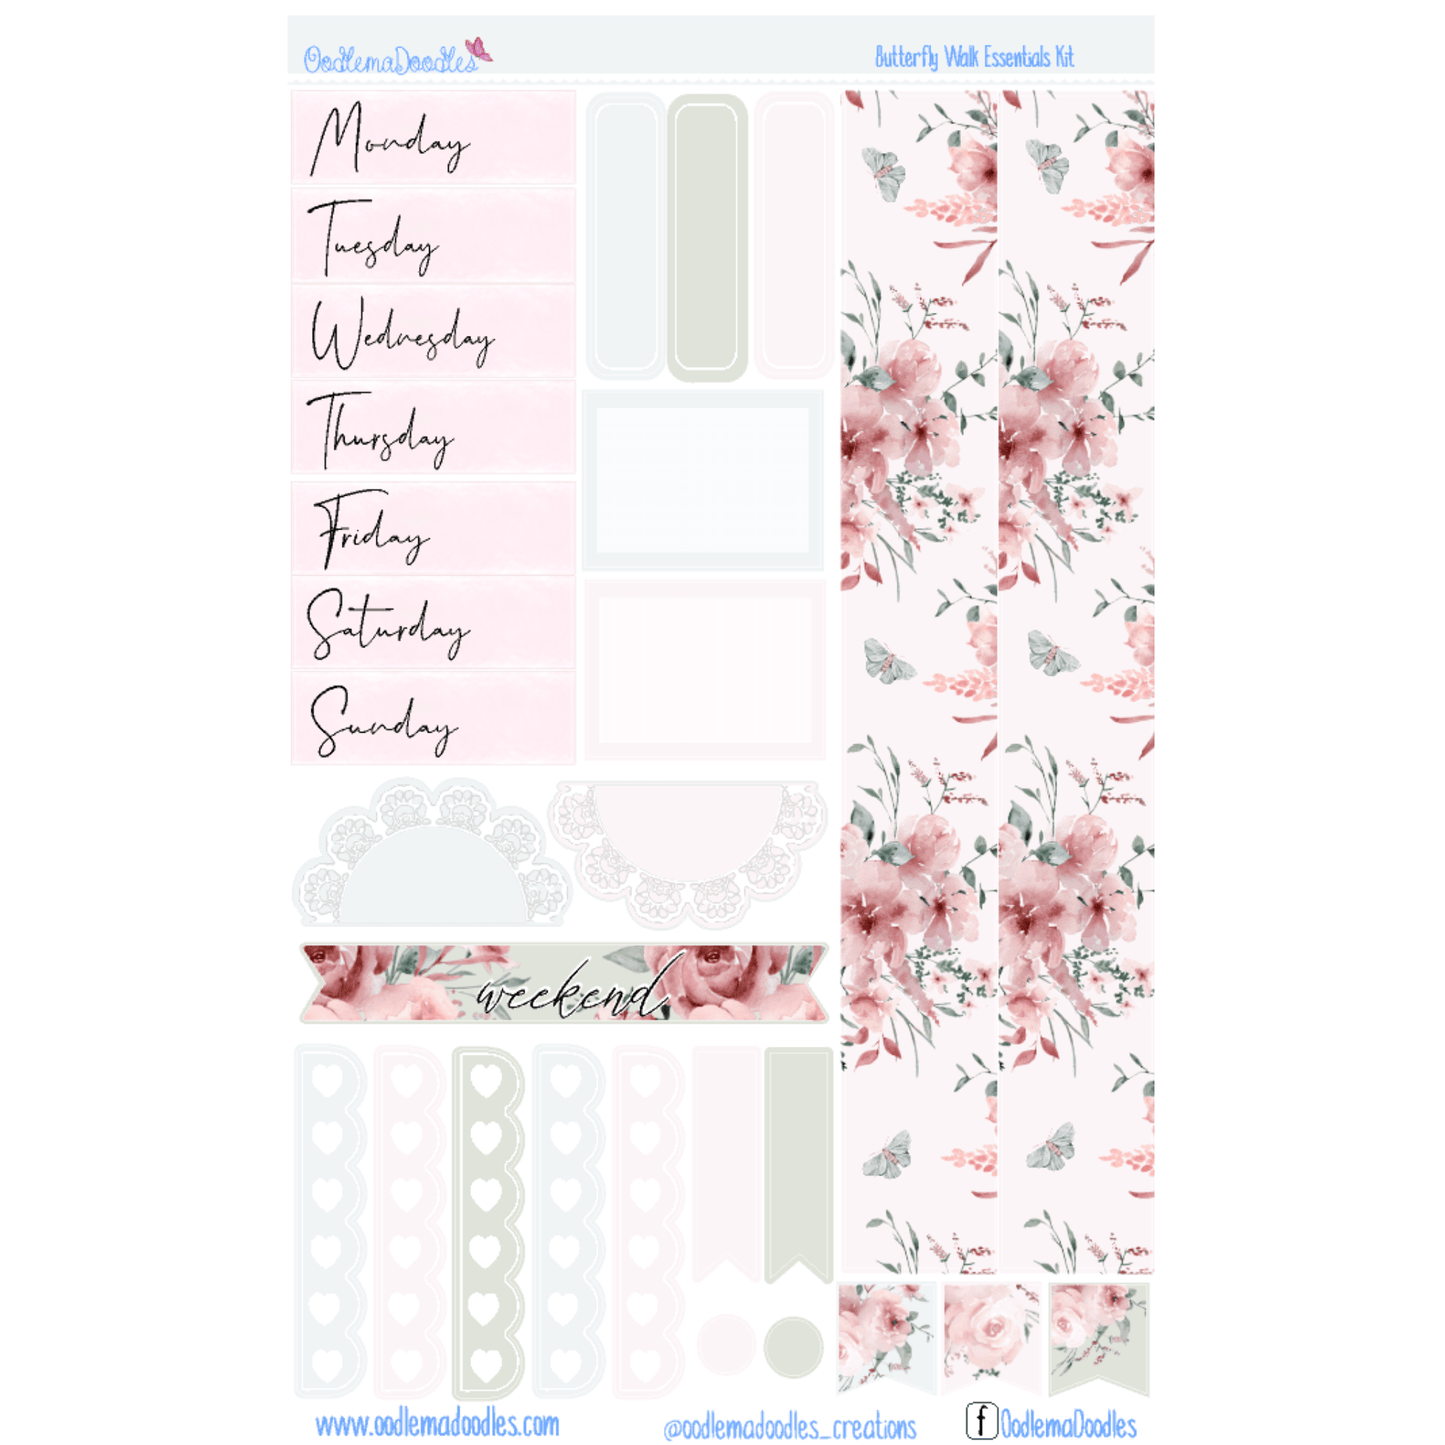 Butterfly Walk Essential Planner Sticker Kit - oodlemadoodles